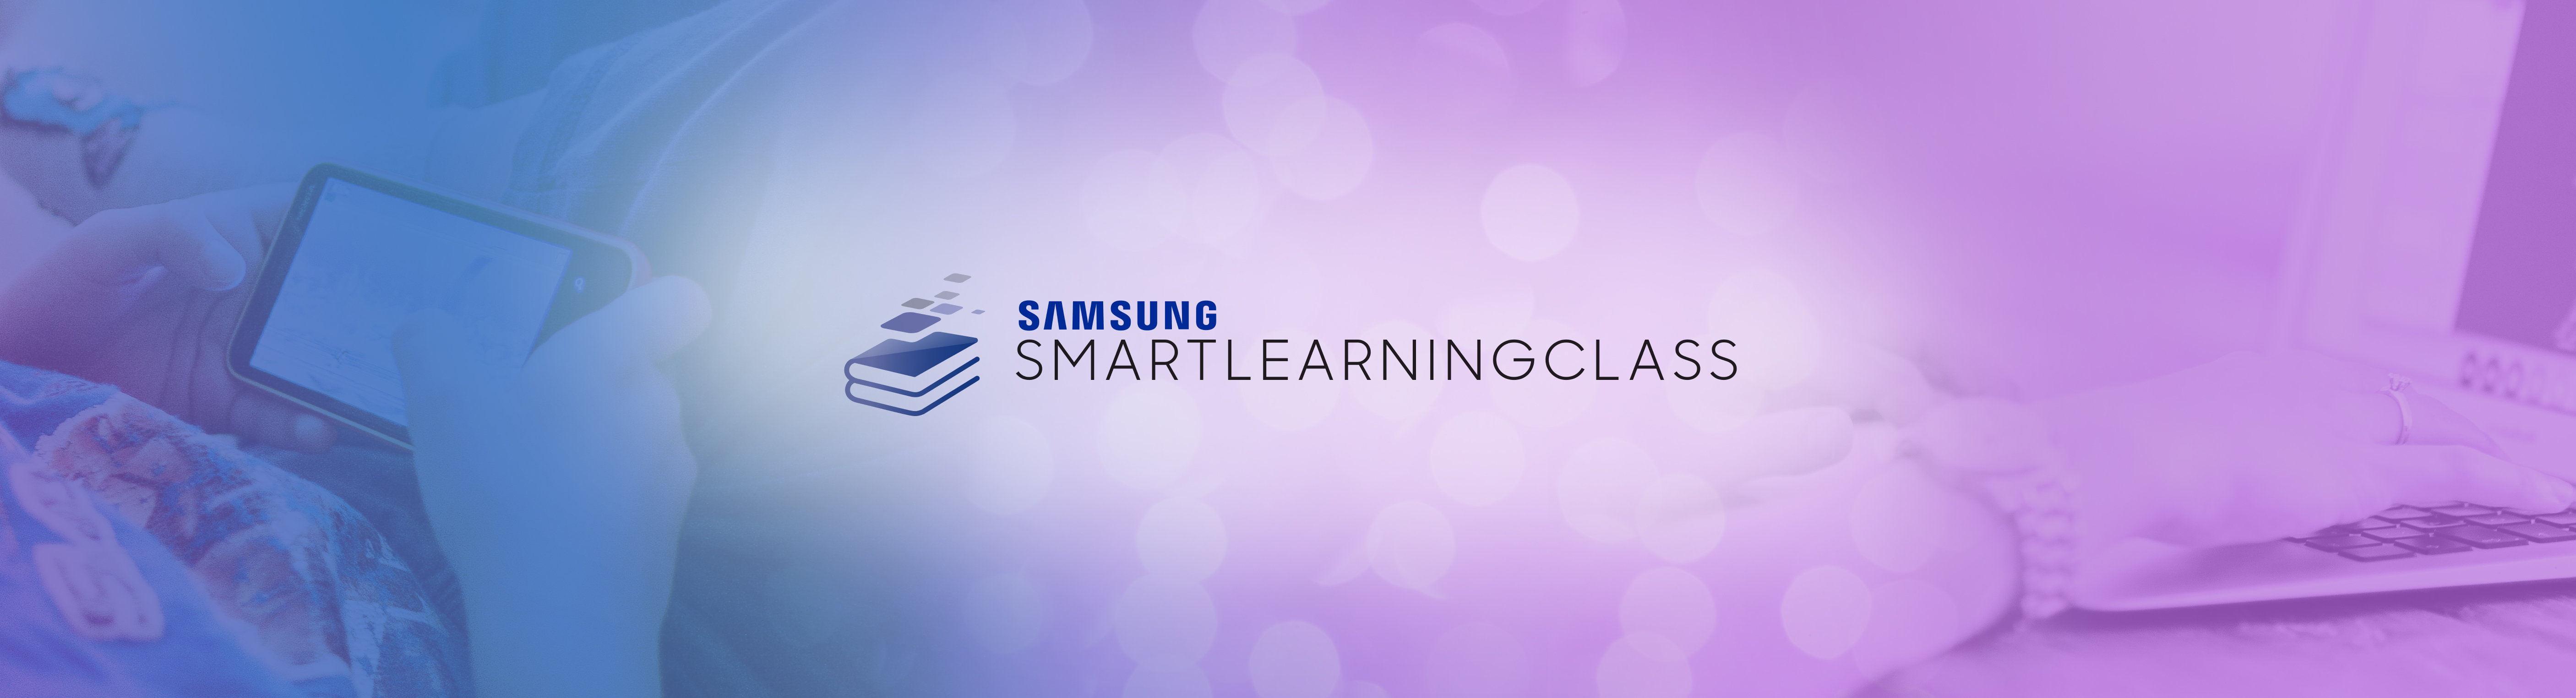 Samsung Smart Learning Class Games Construct Challenge